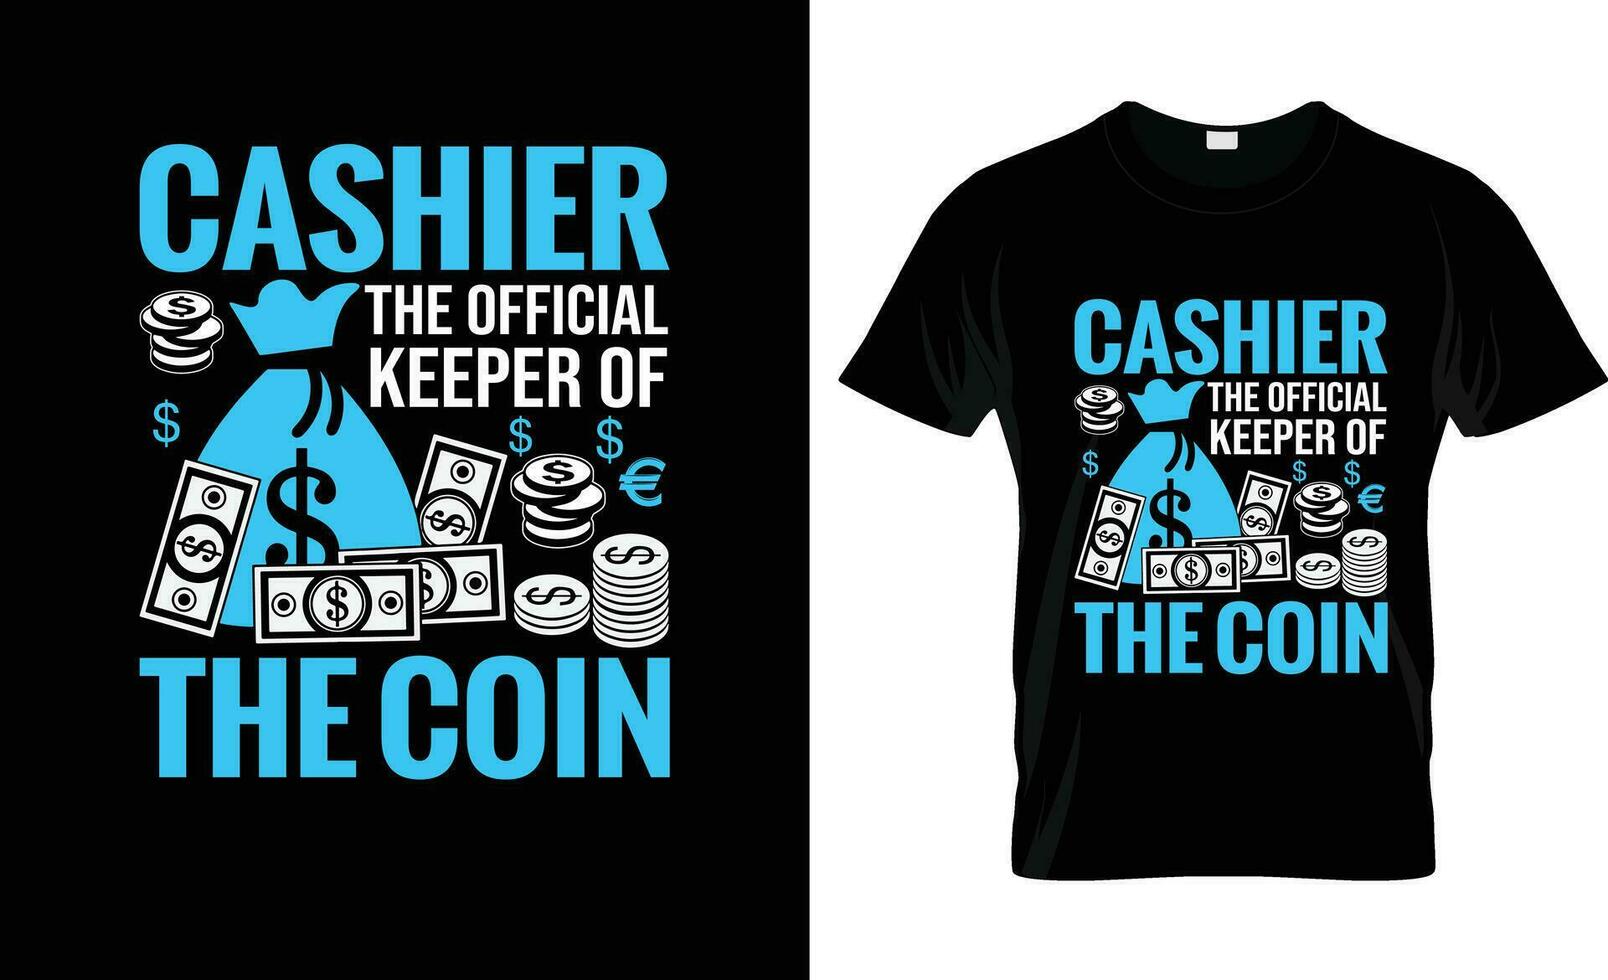 cashier the official keeper of the coin colorful Graphic T-Shirt ,t-shirt print mockup vector